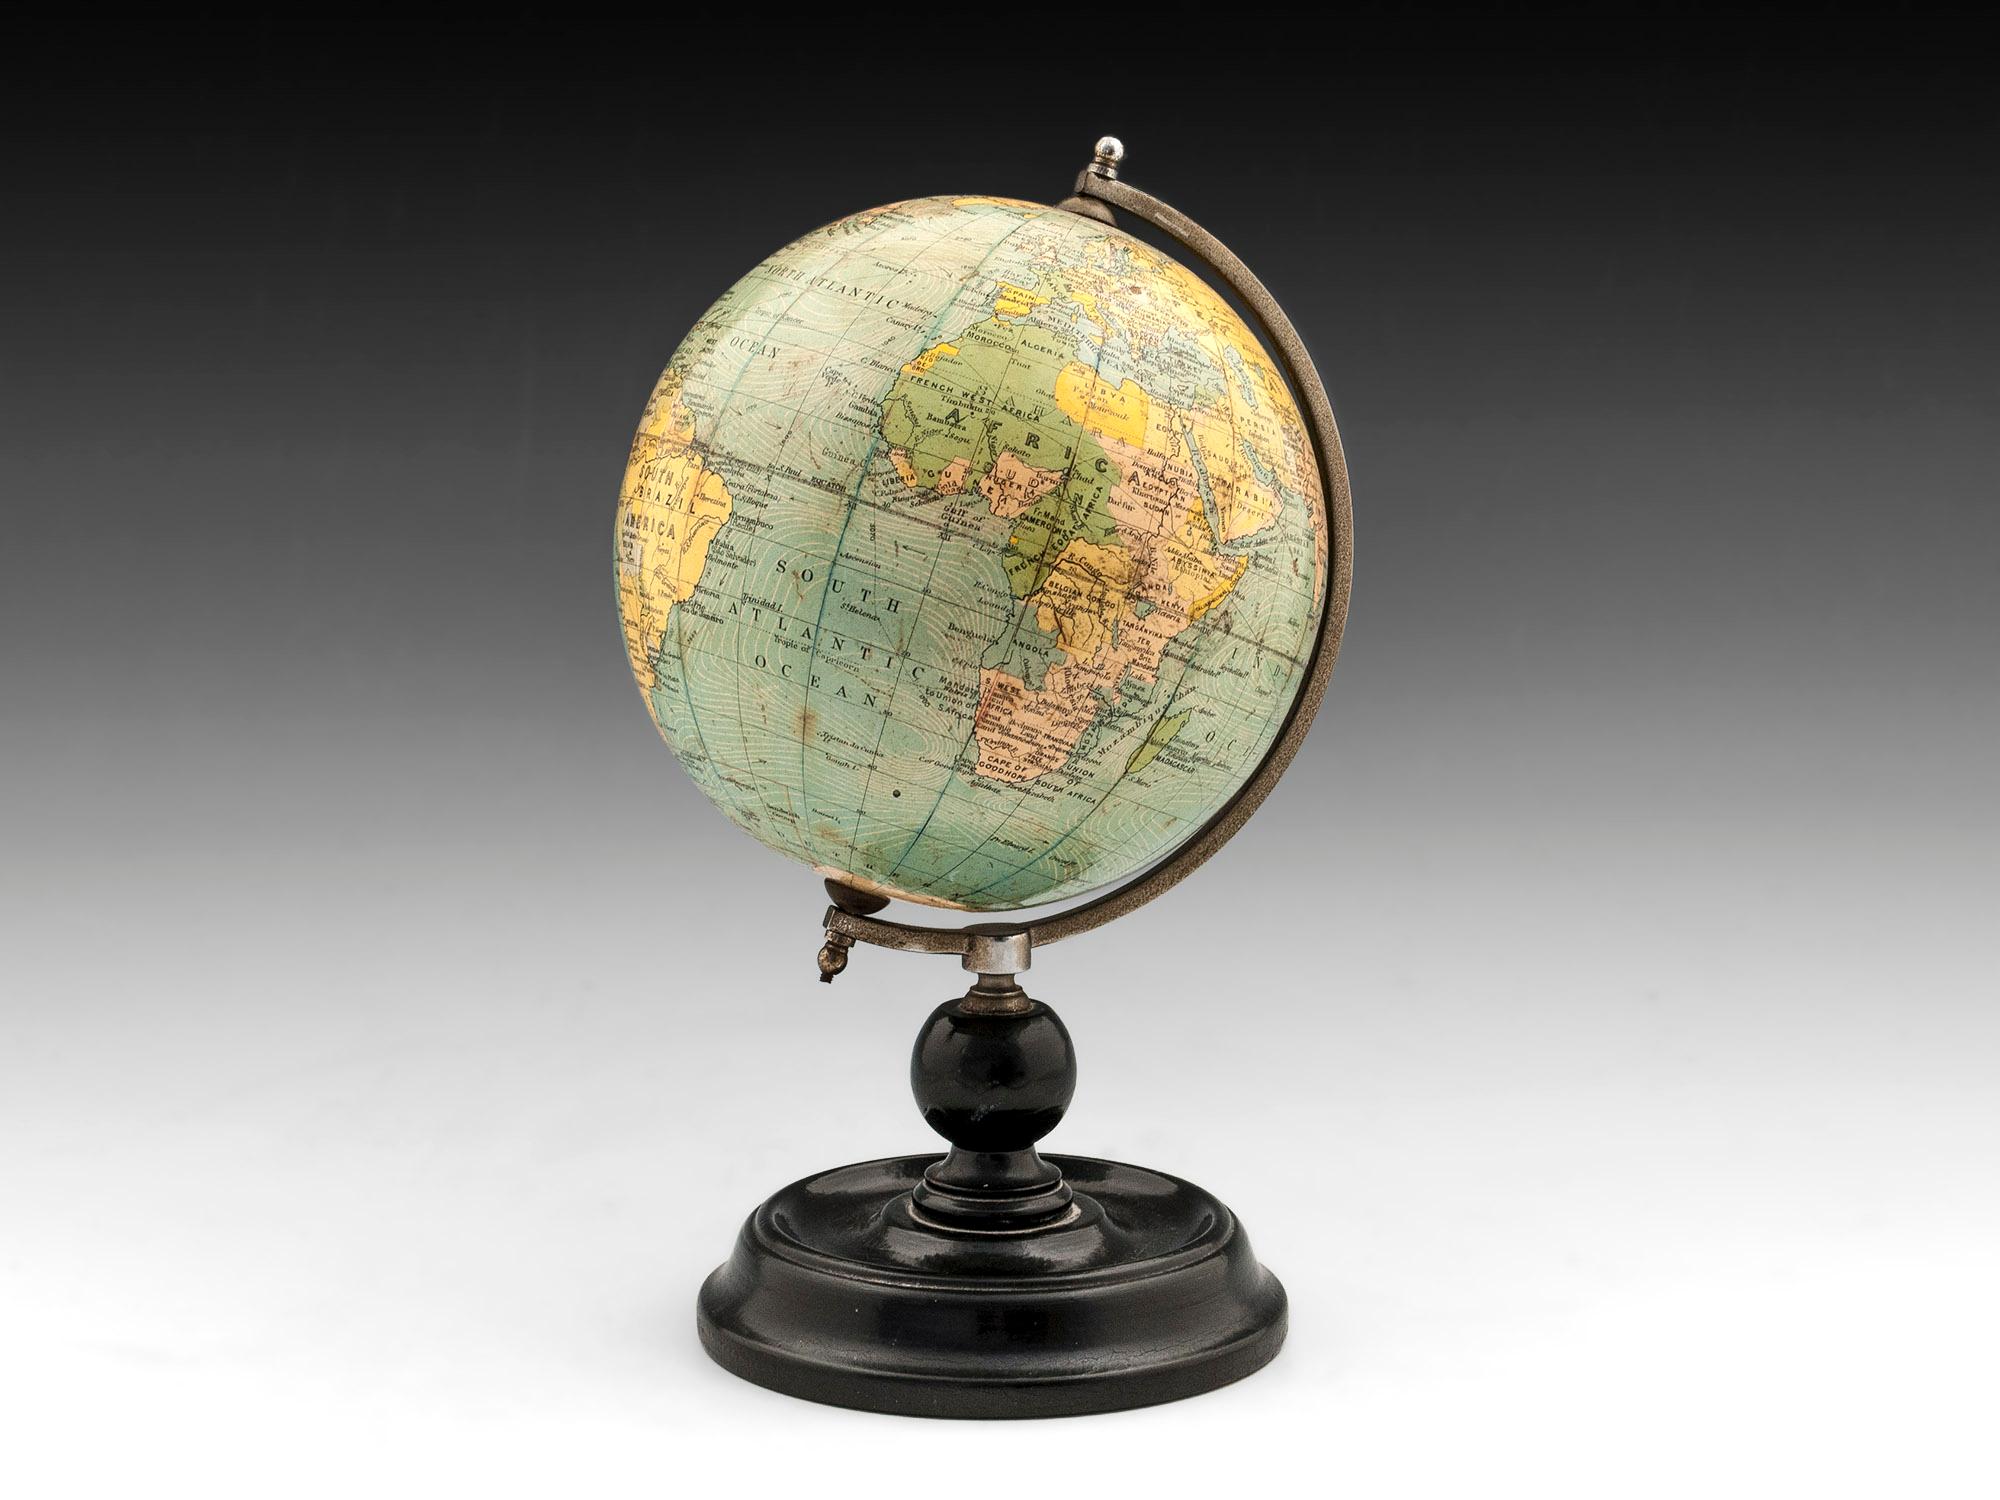 Terrestrial globe by George Phillips & Sons Ltd, Fleet Street, London. 

The six inch terrestrial globe is in superb A1 condition. The brass chapter has a lovely untouched colour and is threaded into the turned ebonized base.